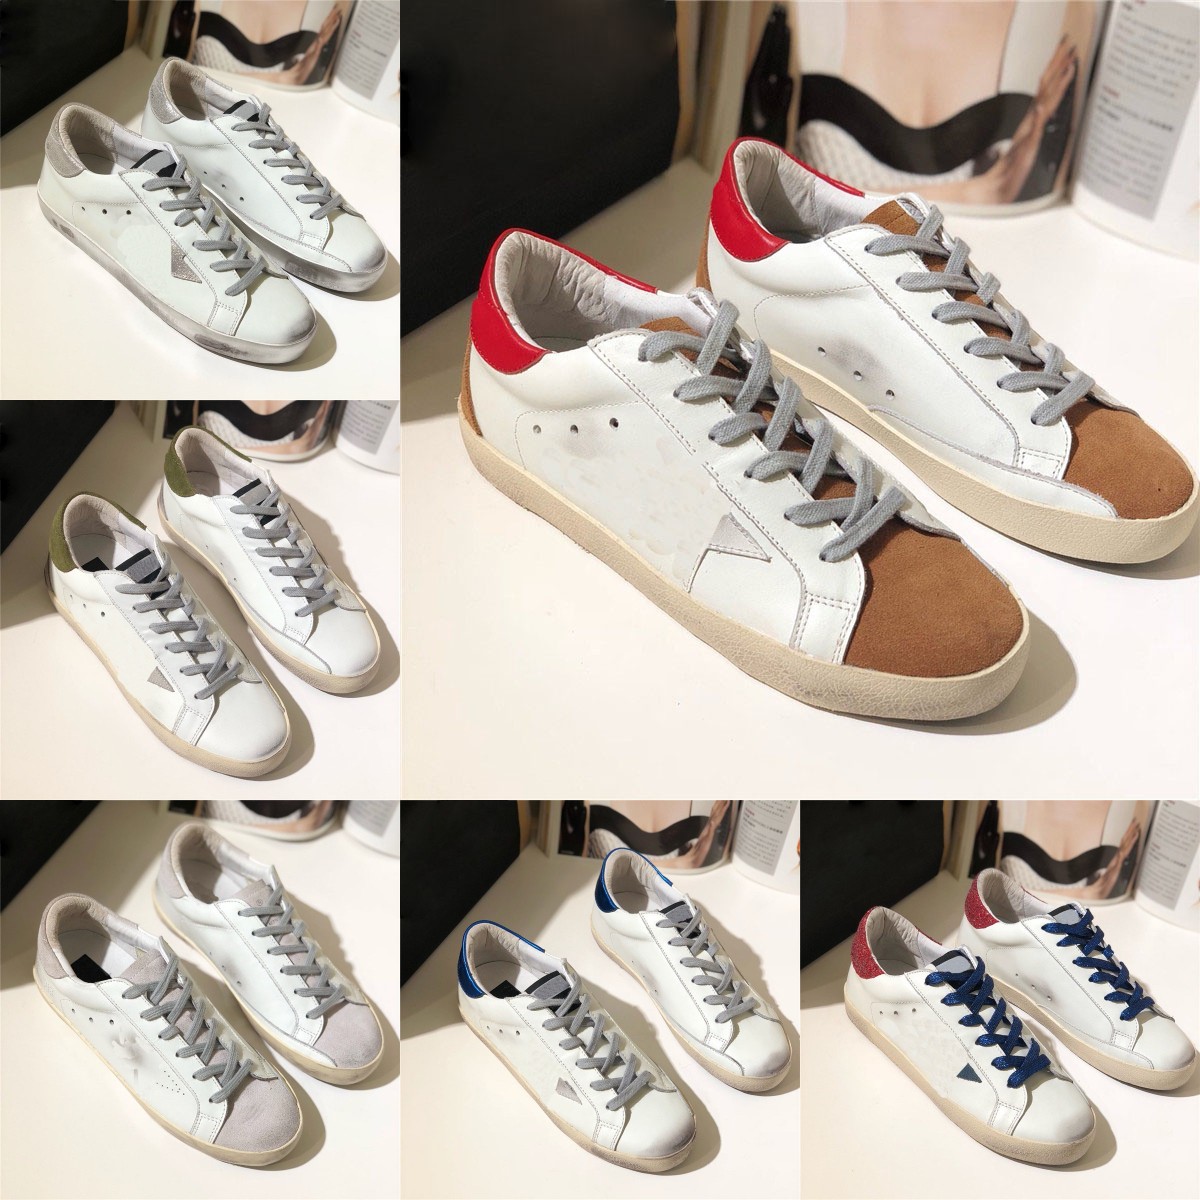 

2021 Designer Golden Goose Casual Shoes Mens Women Luxury Brand Five-pointed Star Pattern Double Small Dirty Lace Up Vintage Trainers Do-Old Bottom Sneakers With Box